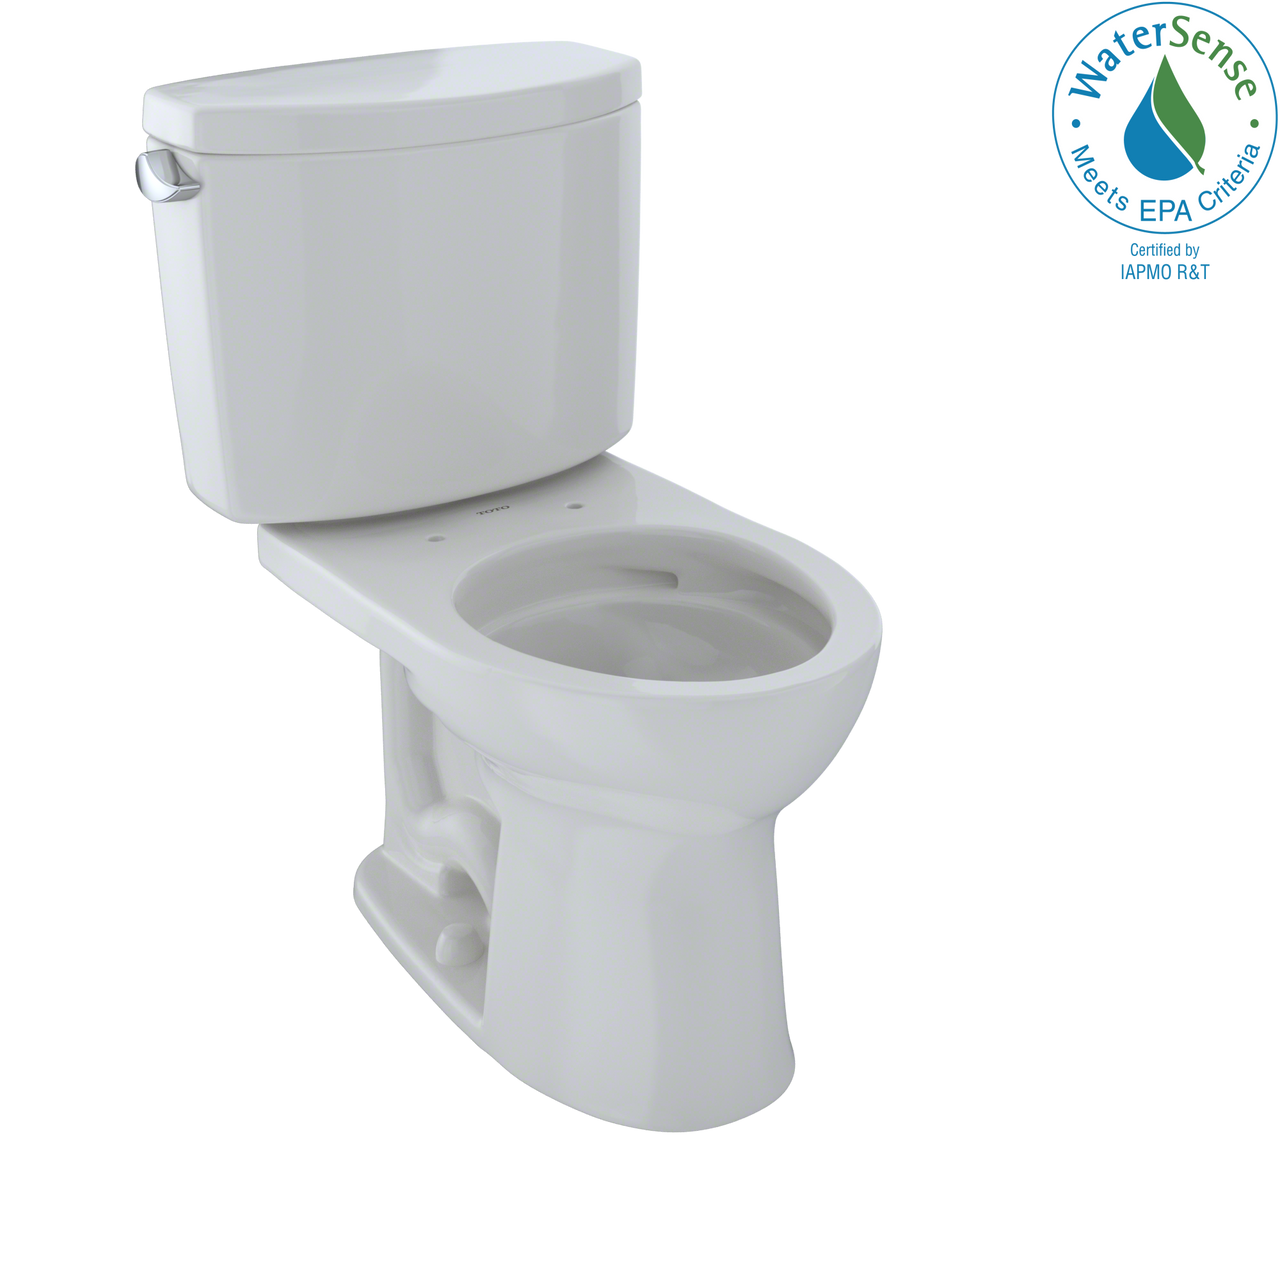 TOTO Drake II Two-Piece Round 1.28 GPF Universal Height Toilet with CeFiONtect,   - CST453CEFG#11 - BNGBath